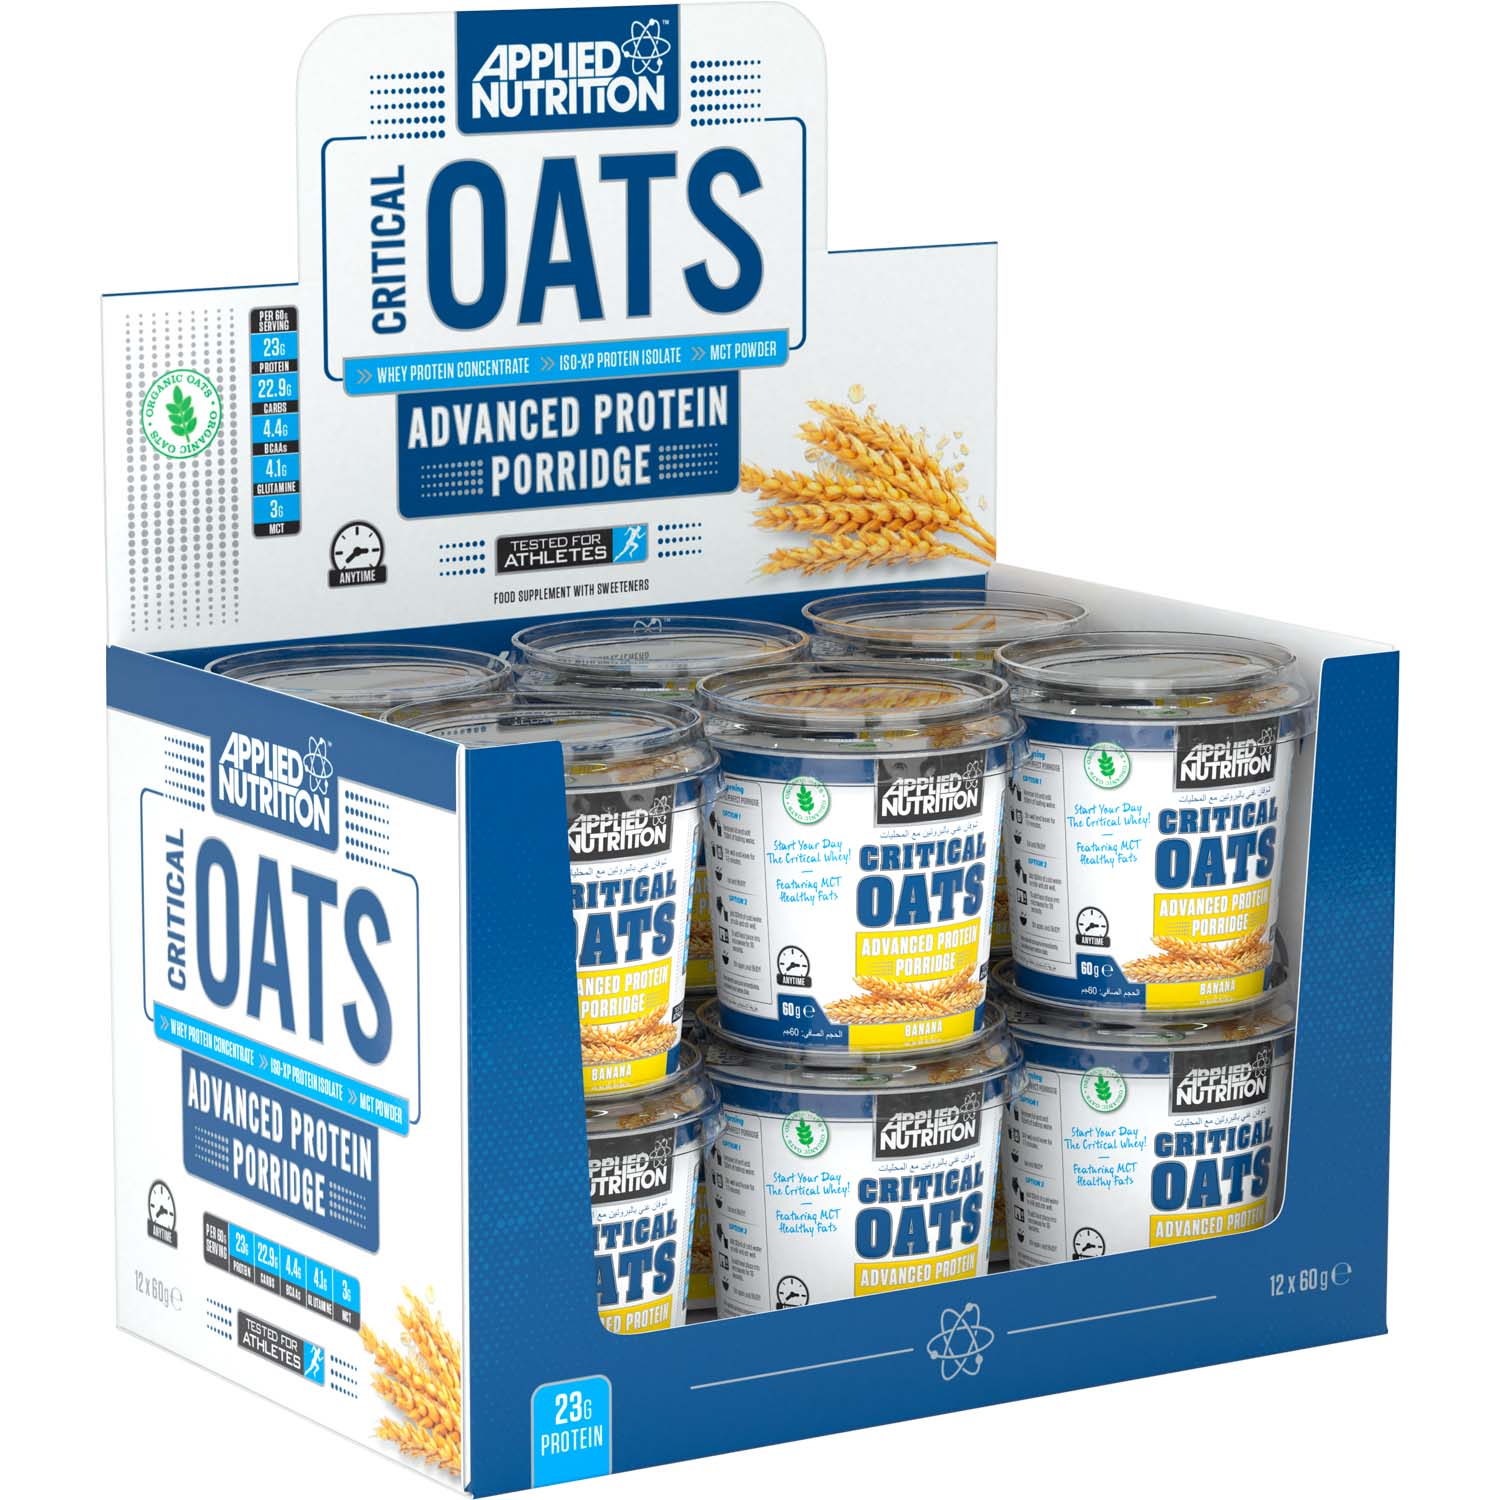 Applied Nutrition Critical Oats Box of 12 Pieces Banana